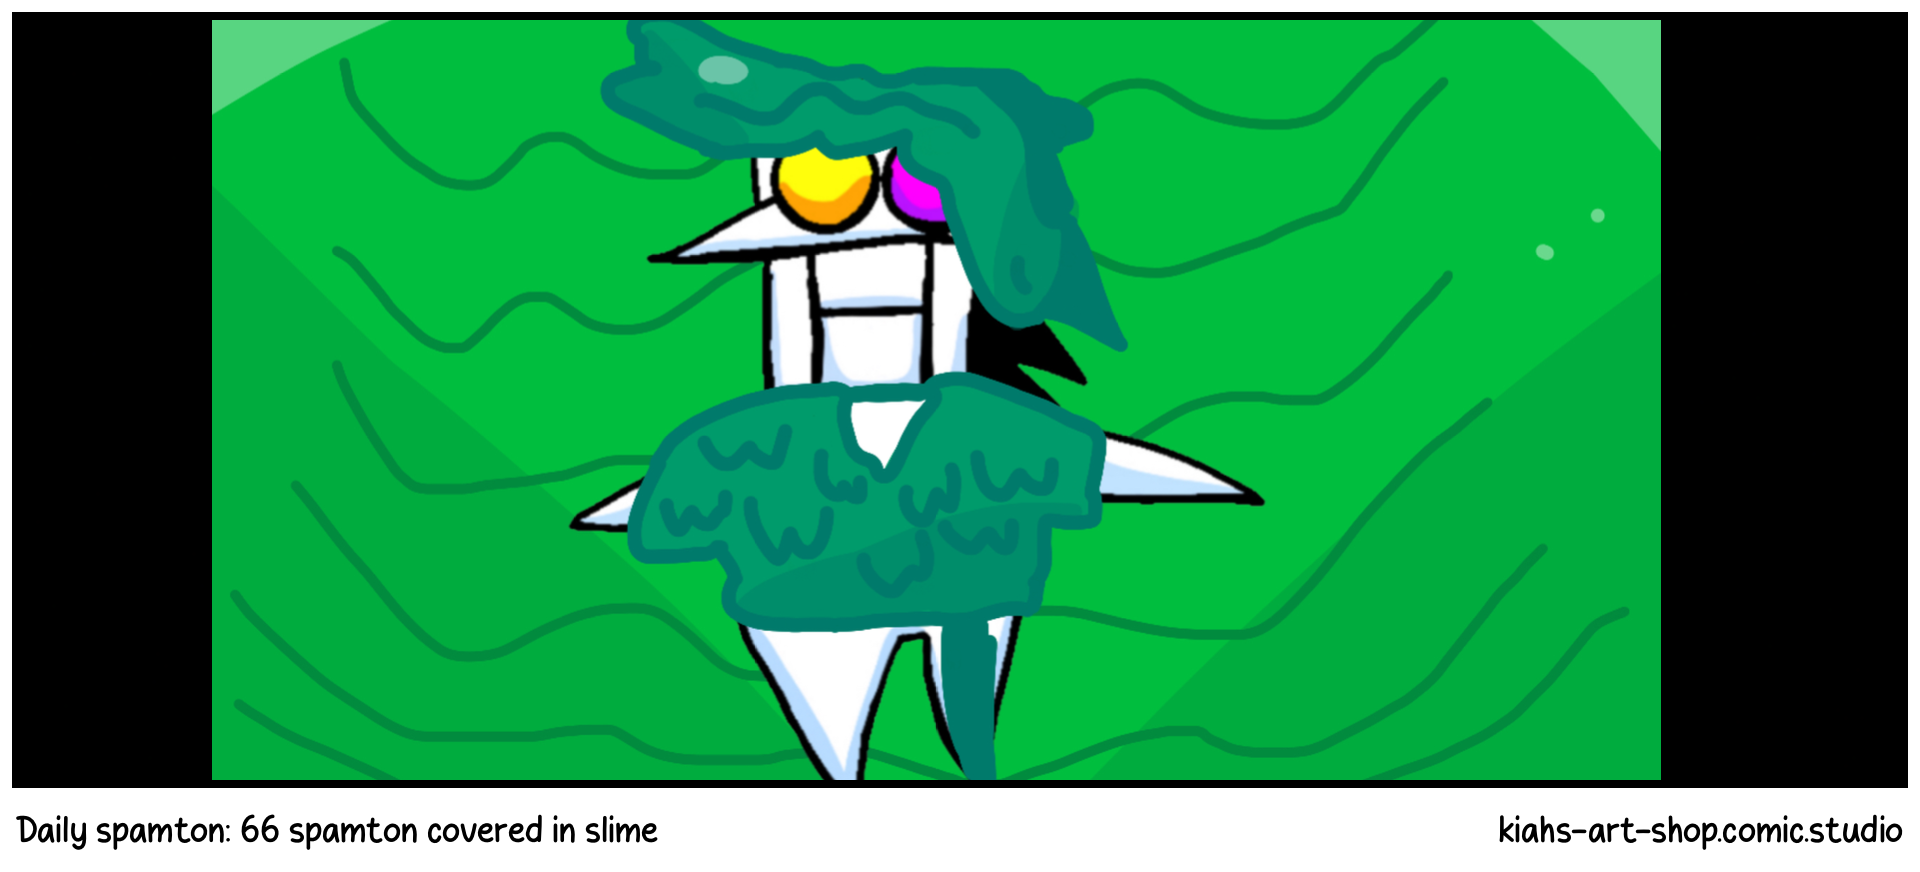 Daily spamton: 66 spamton covered in slime